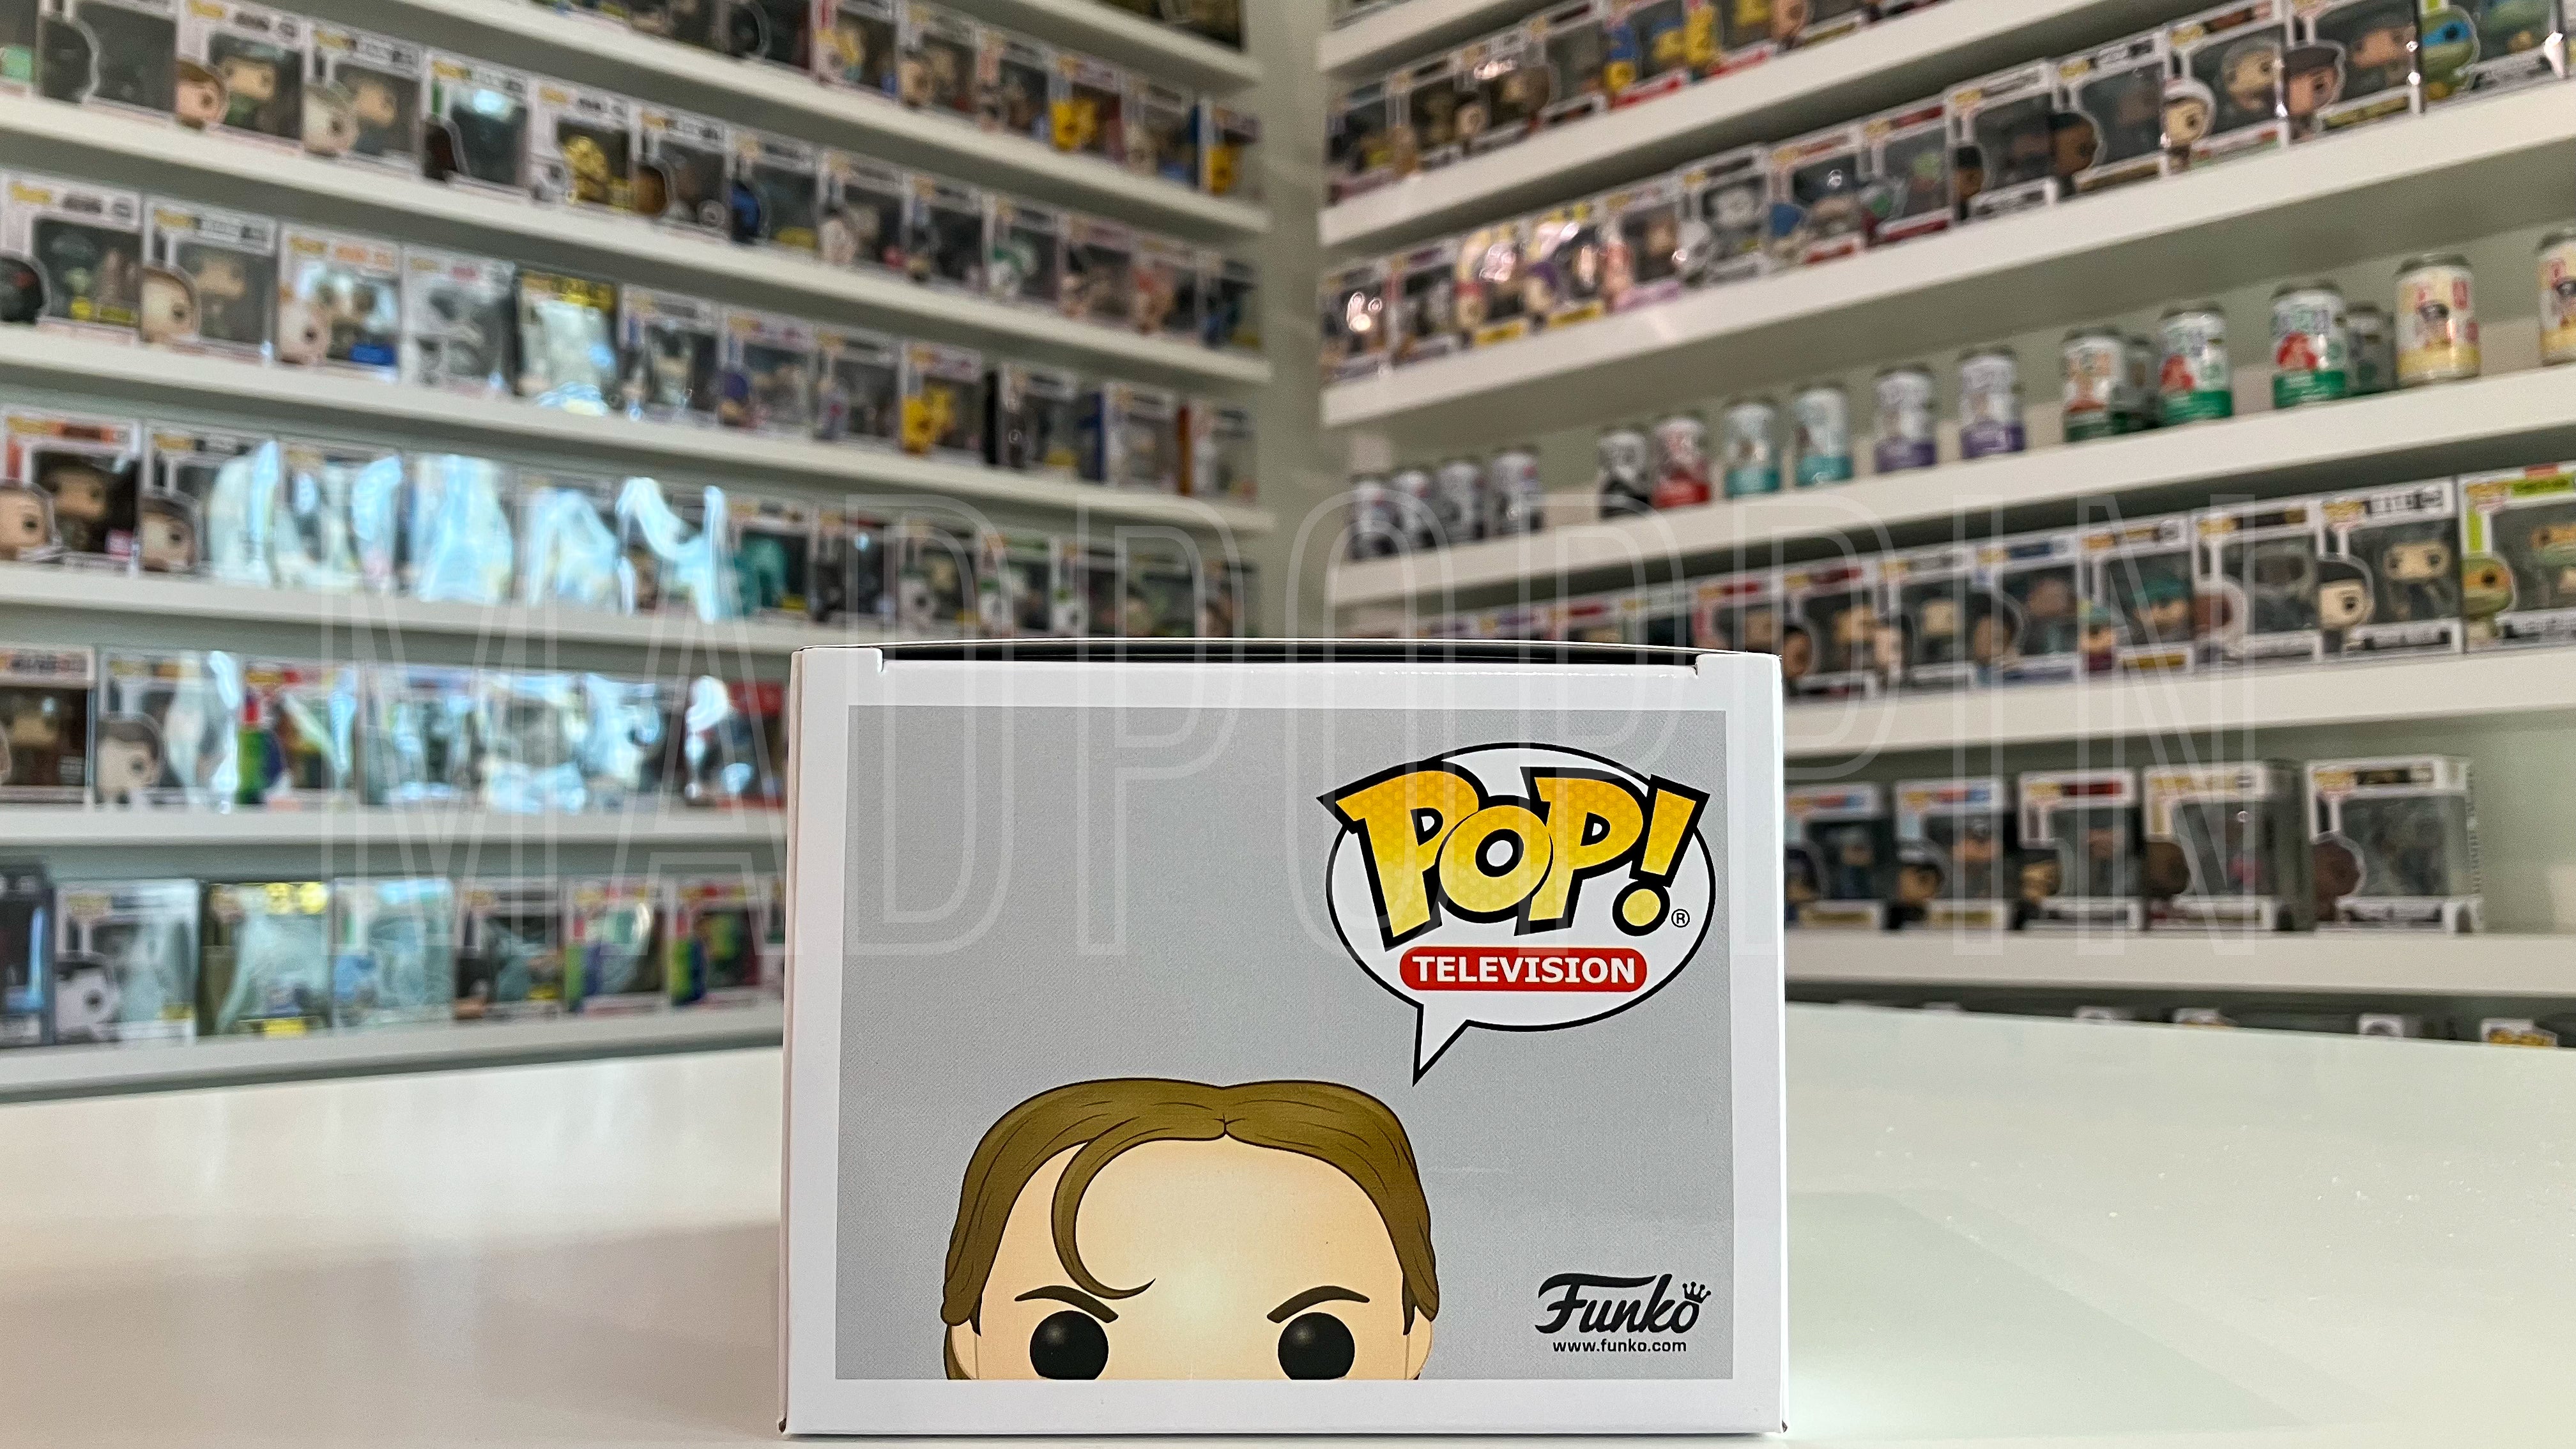 Funko Pop Tv The Office Dwight Schrute As Pam Beesly Funko-shop.com 1049